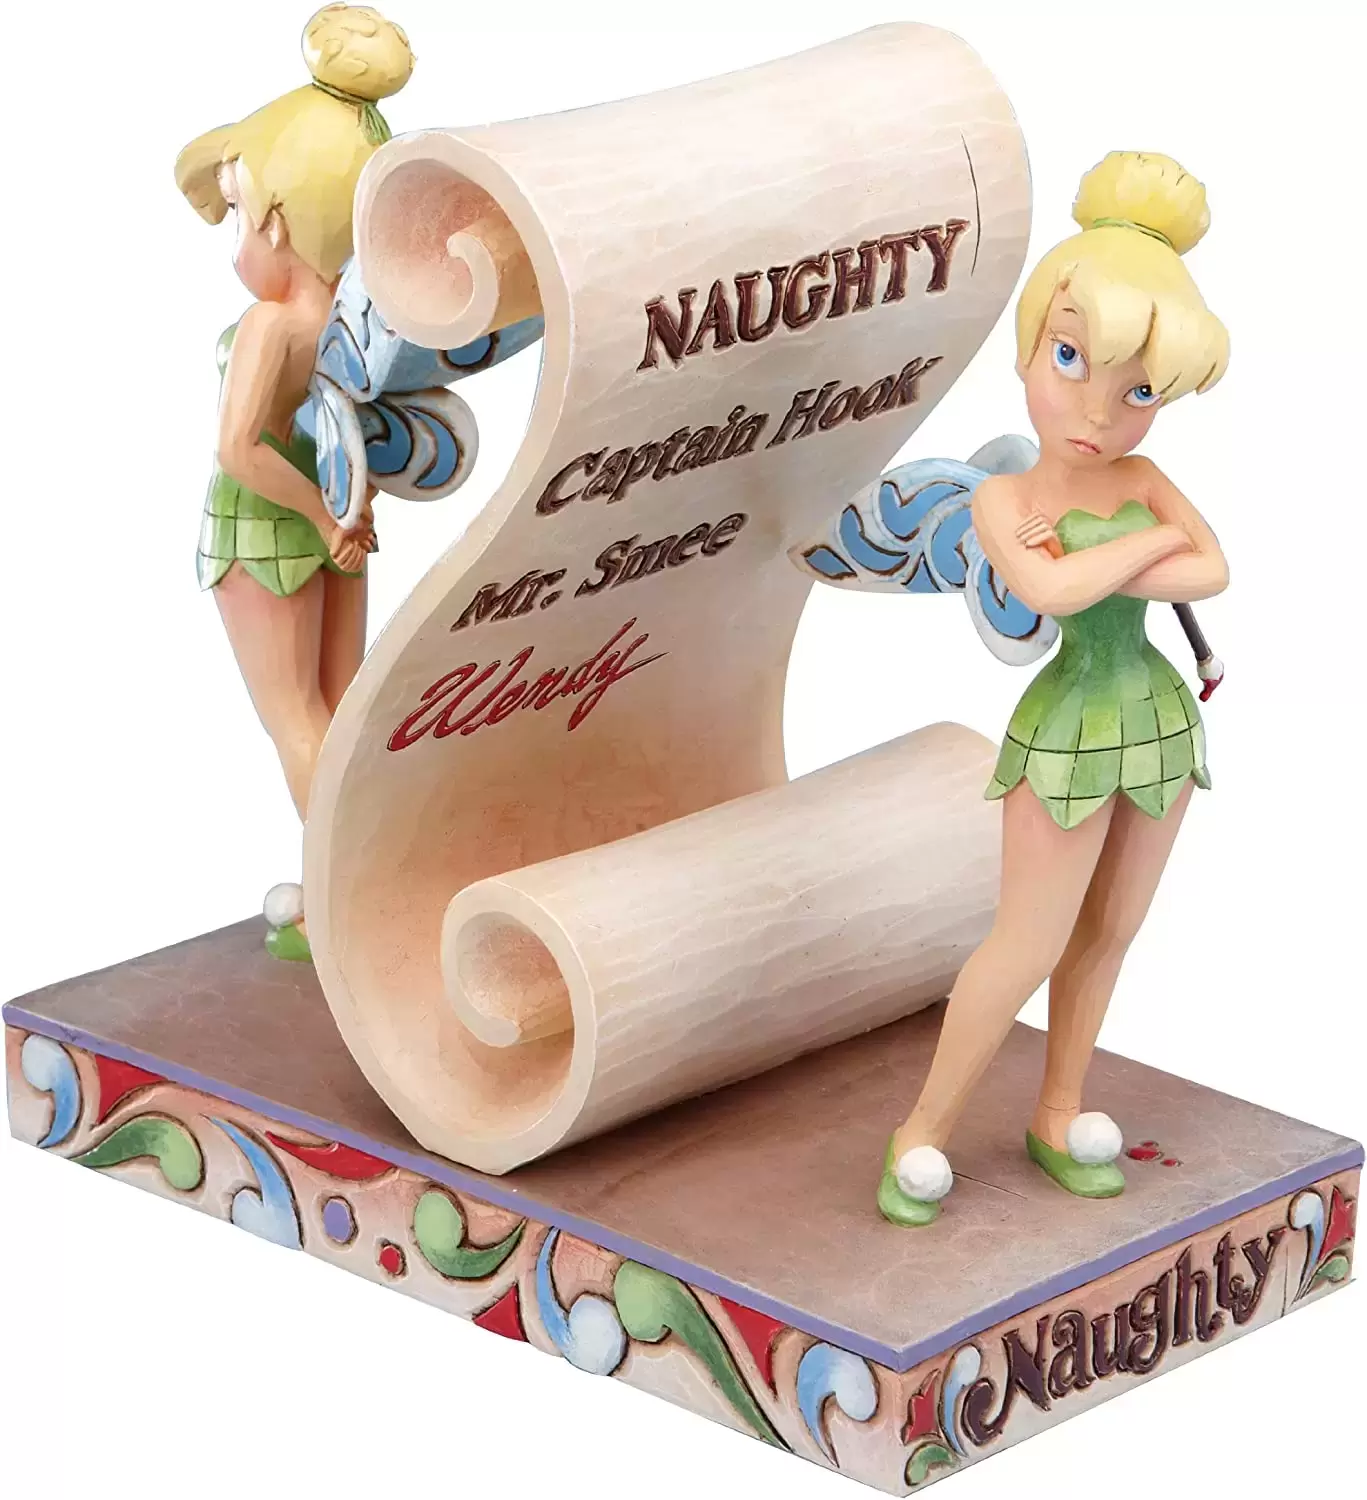 Disney Traditions by Jim Shore - Have you been naughty or nice ?